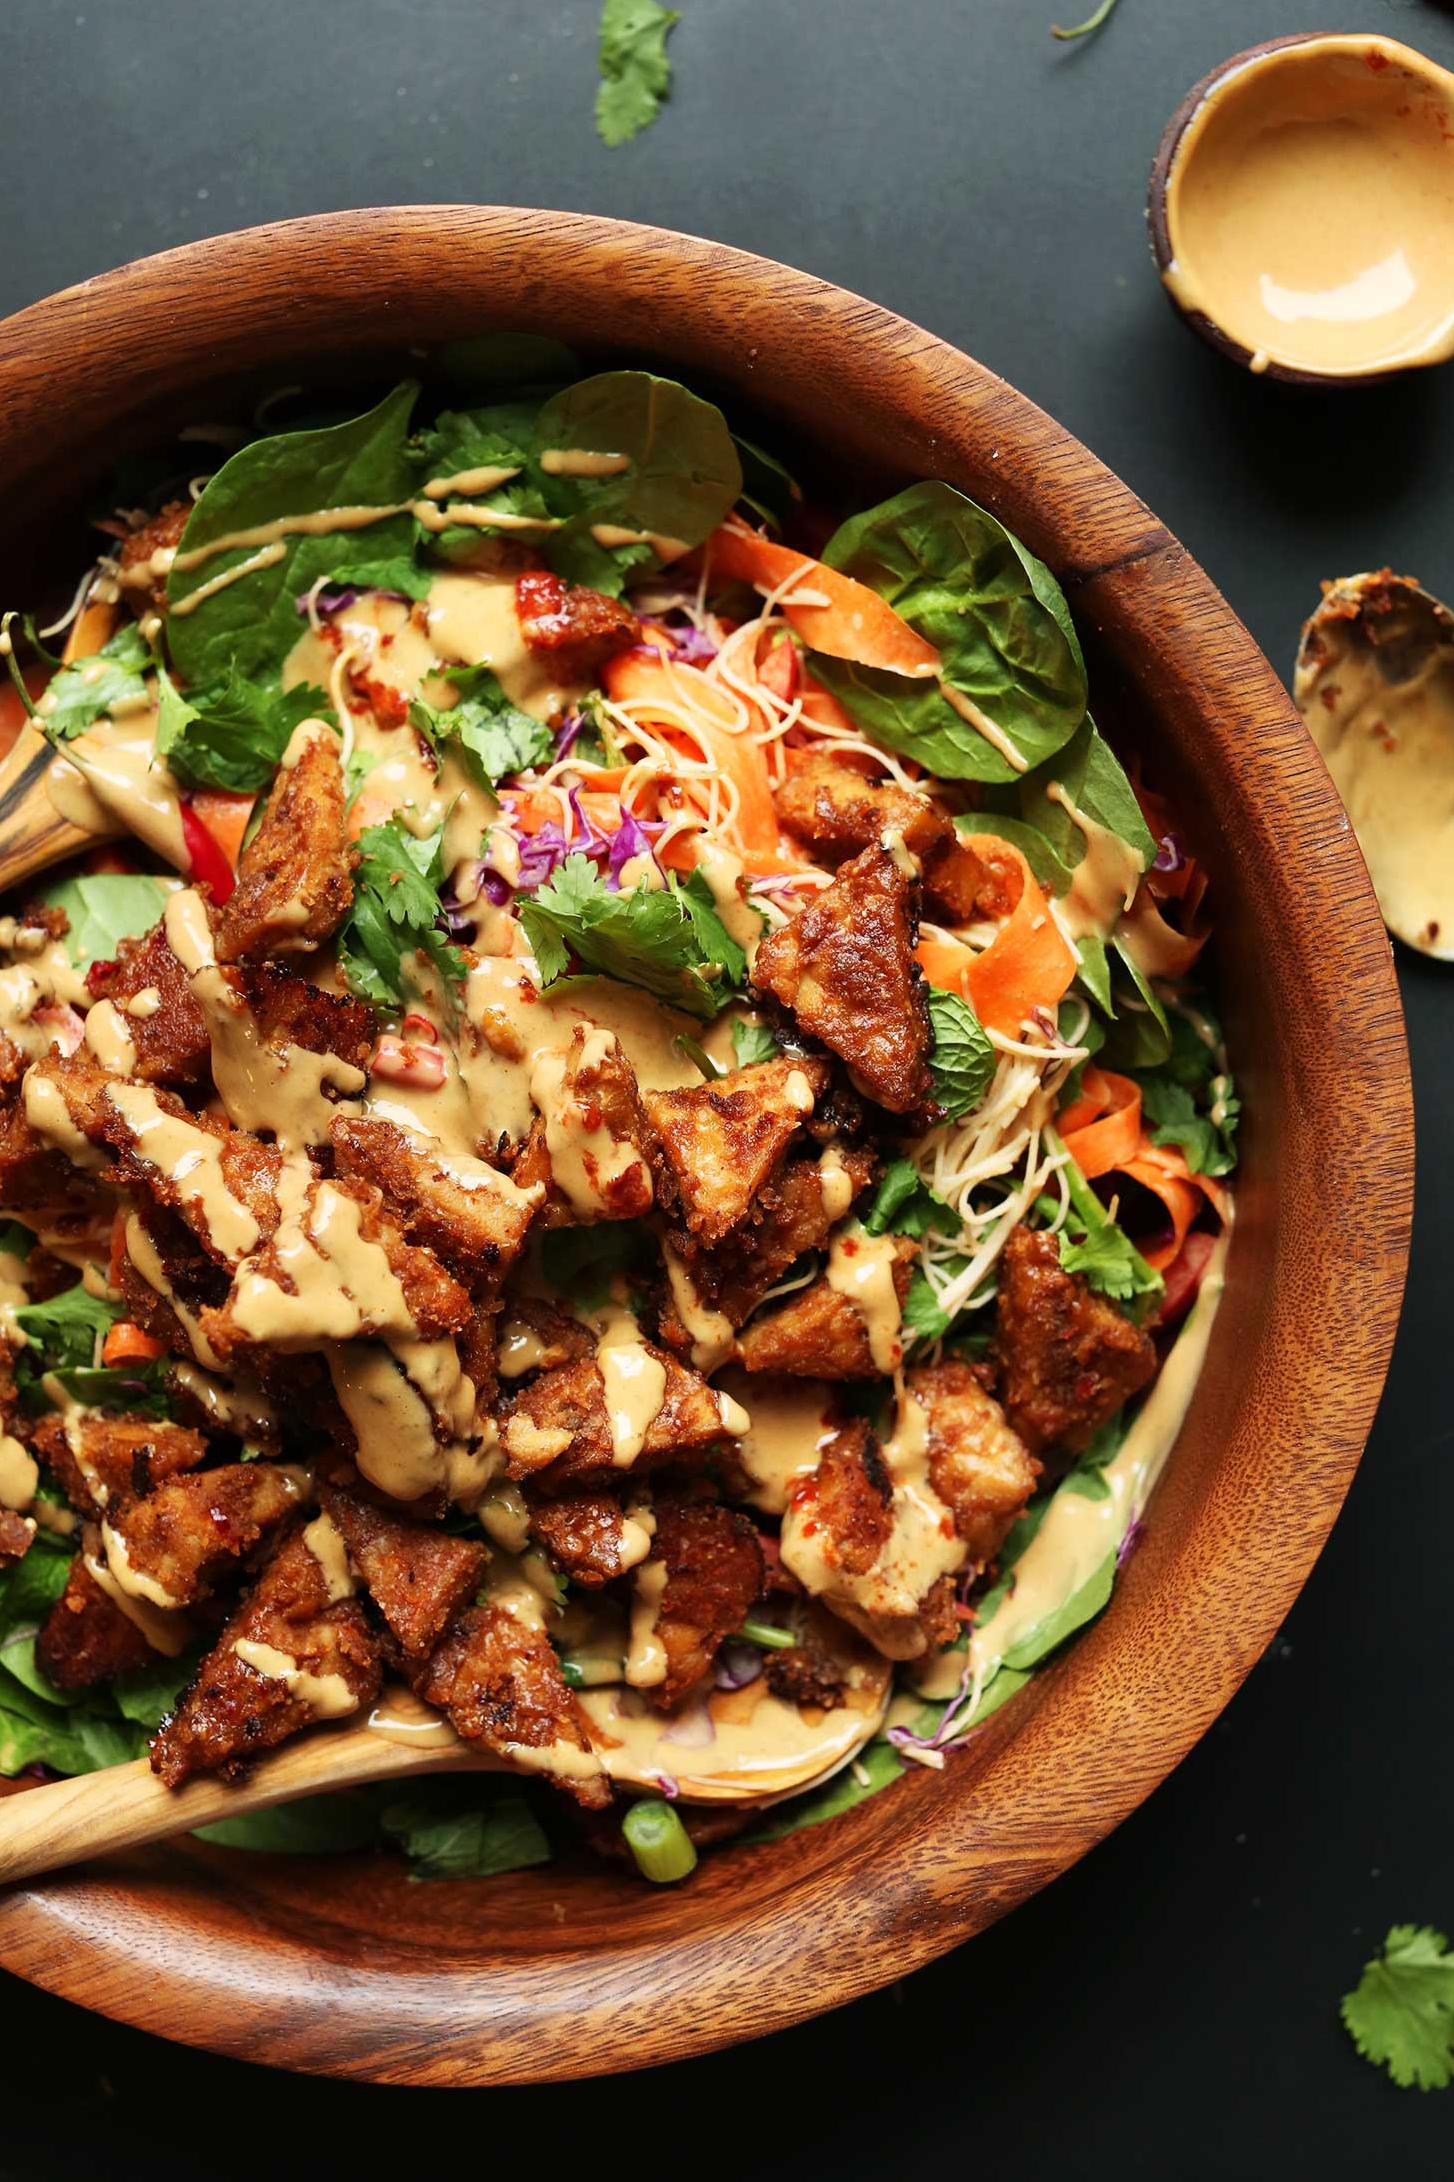  Say goodbye to boring lunches and hello to this delicious tempeh salad.